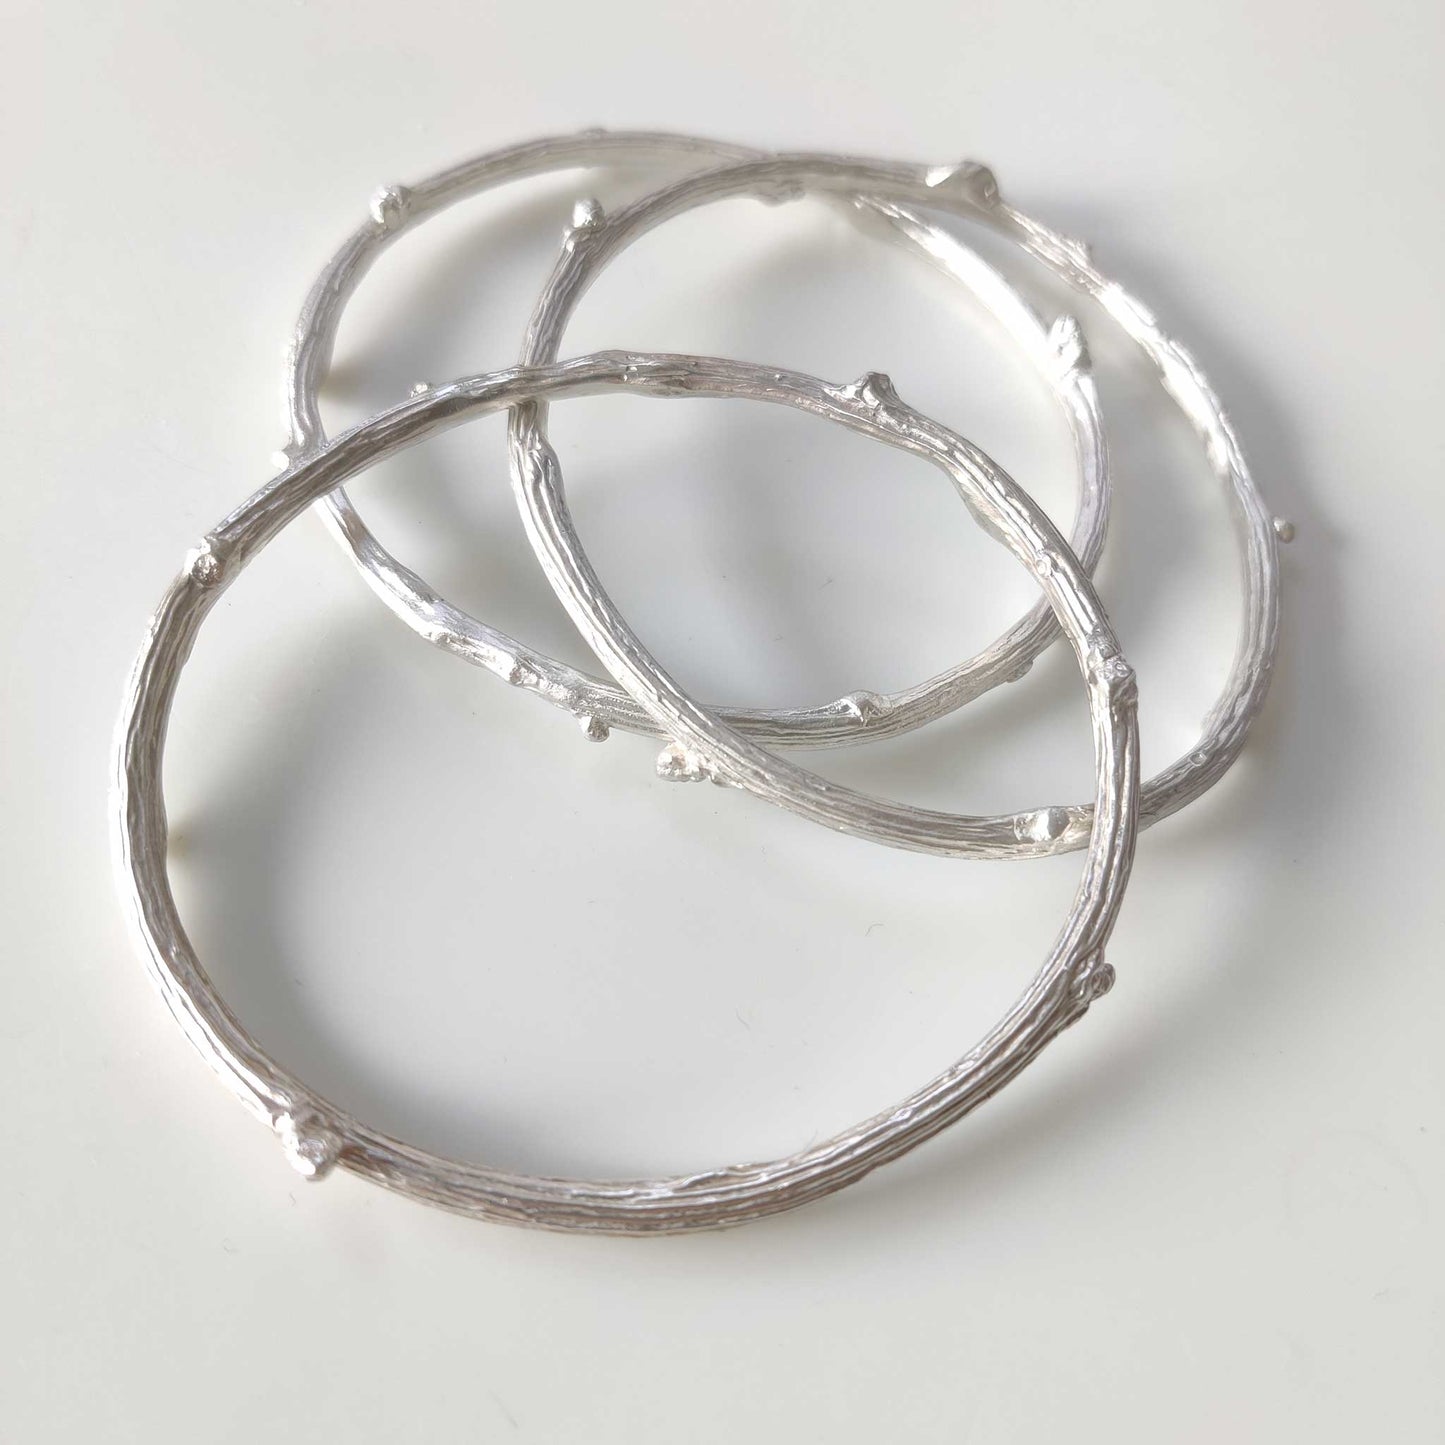 Chunky sterling silver twig bangles